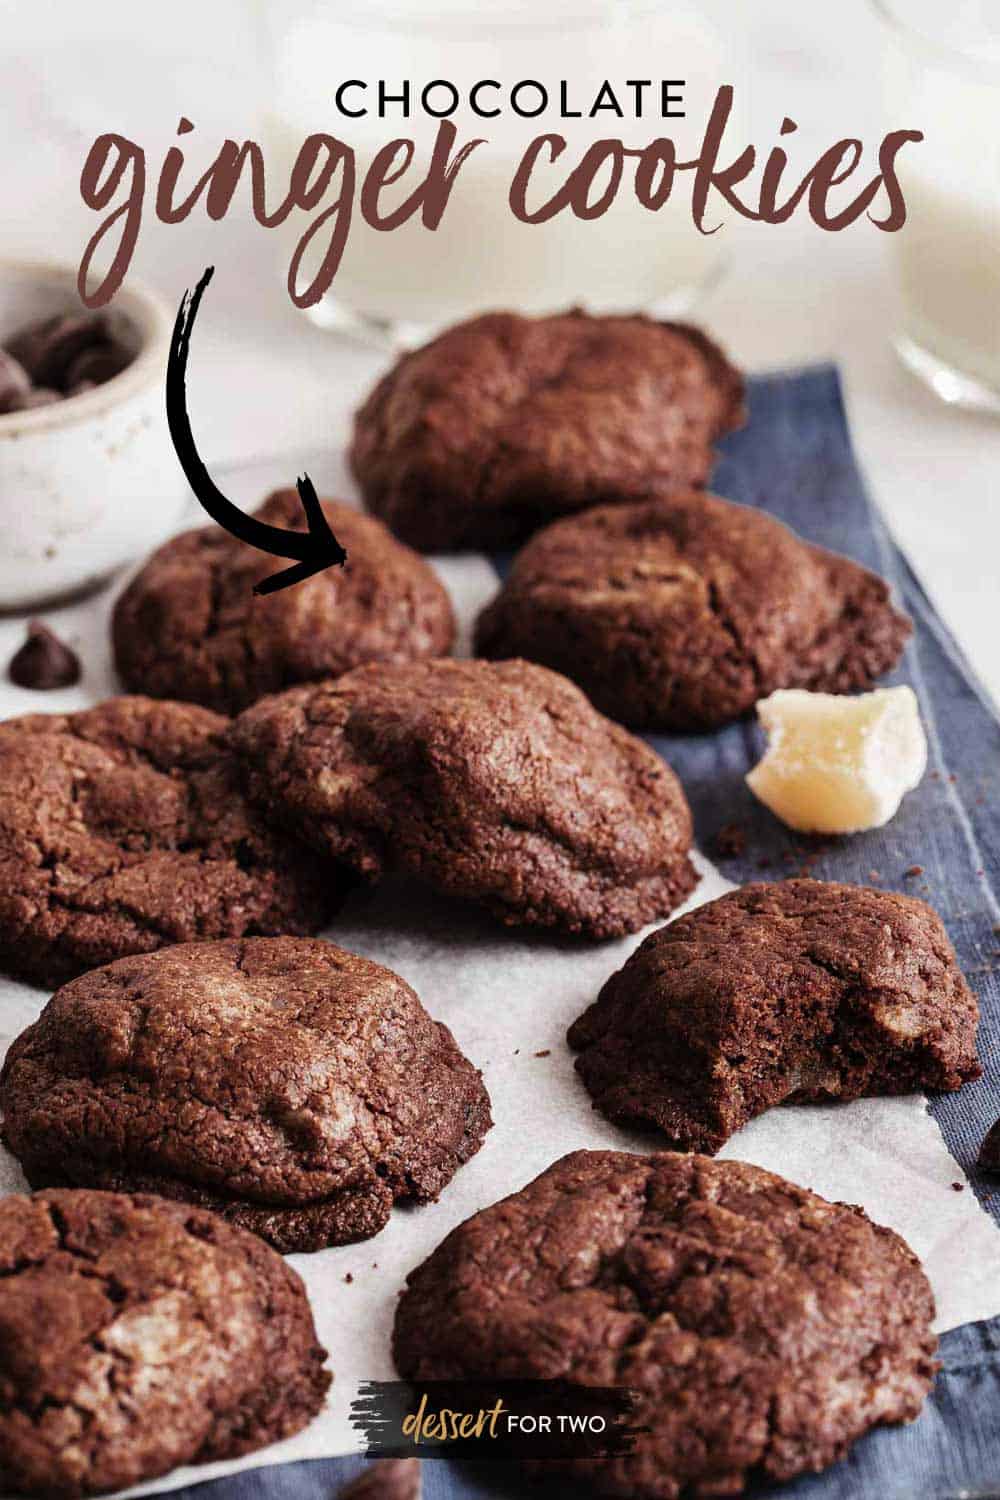 Chocolate ginger cookies on blue napkin.